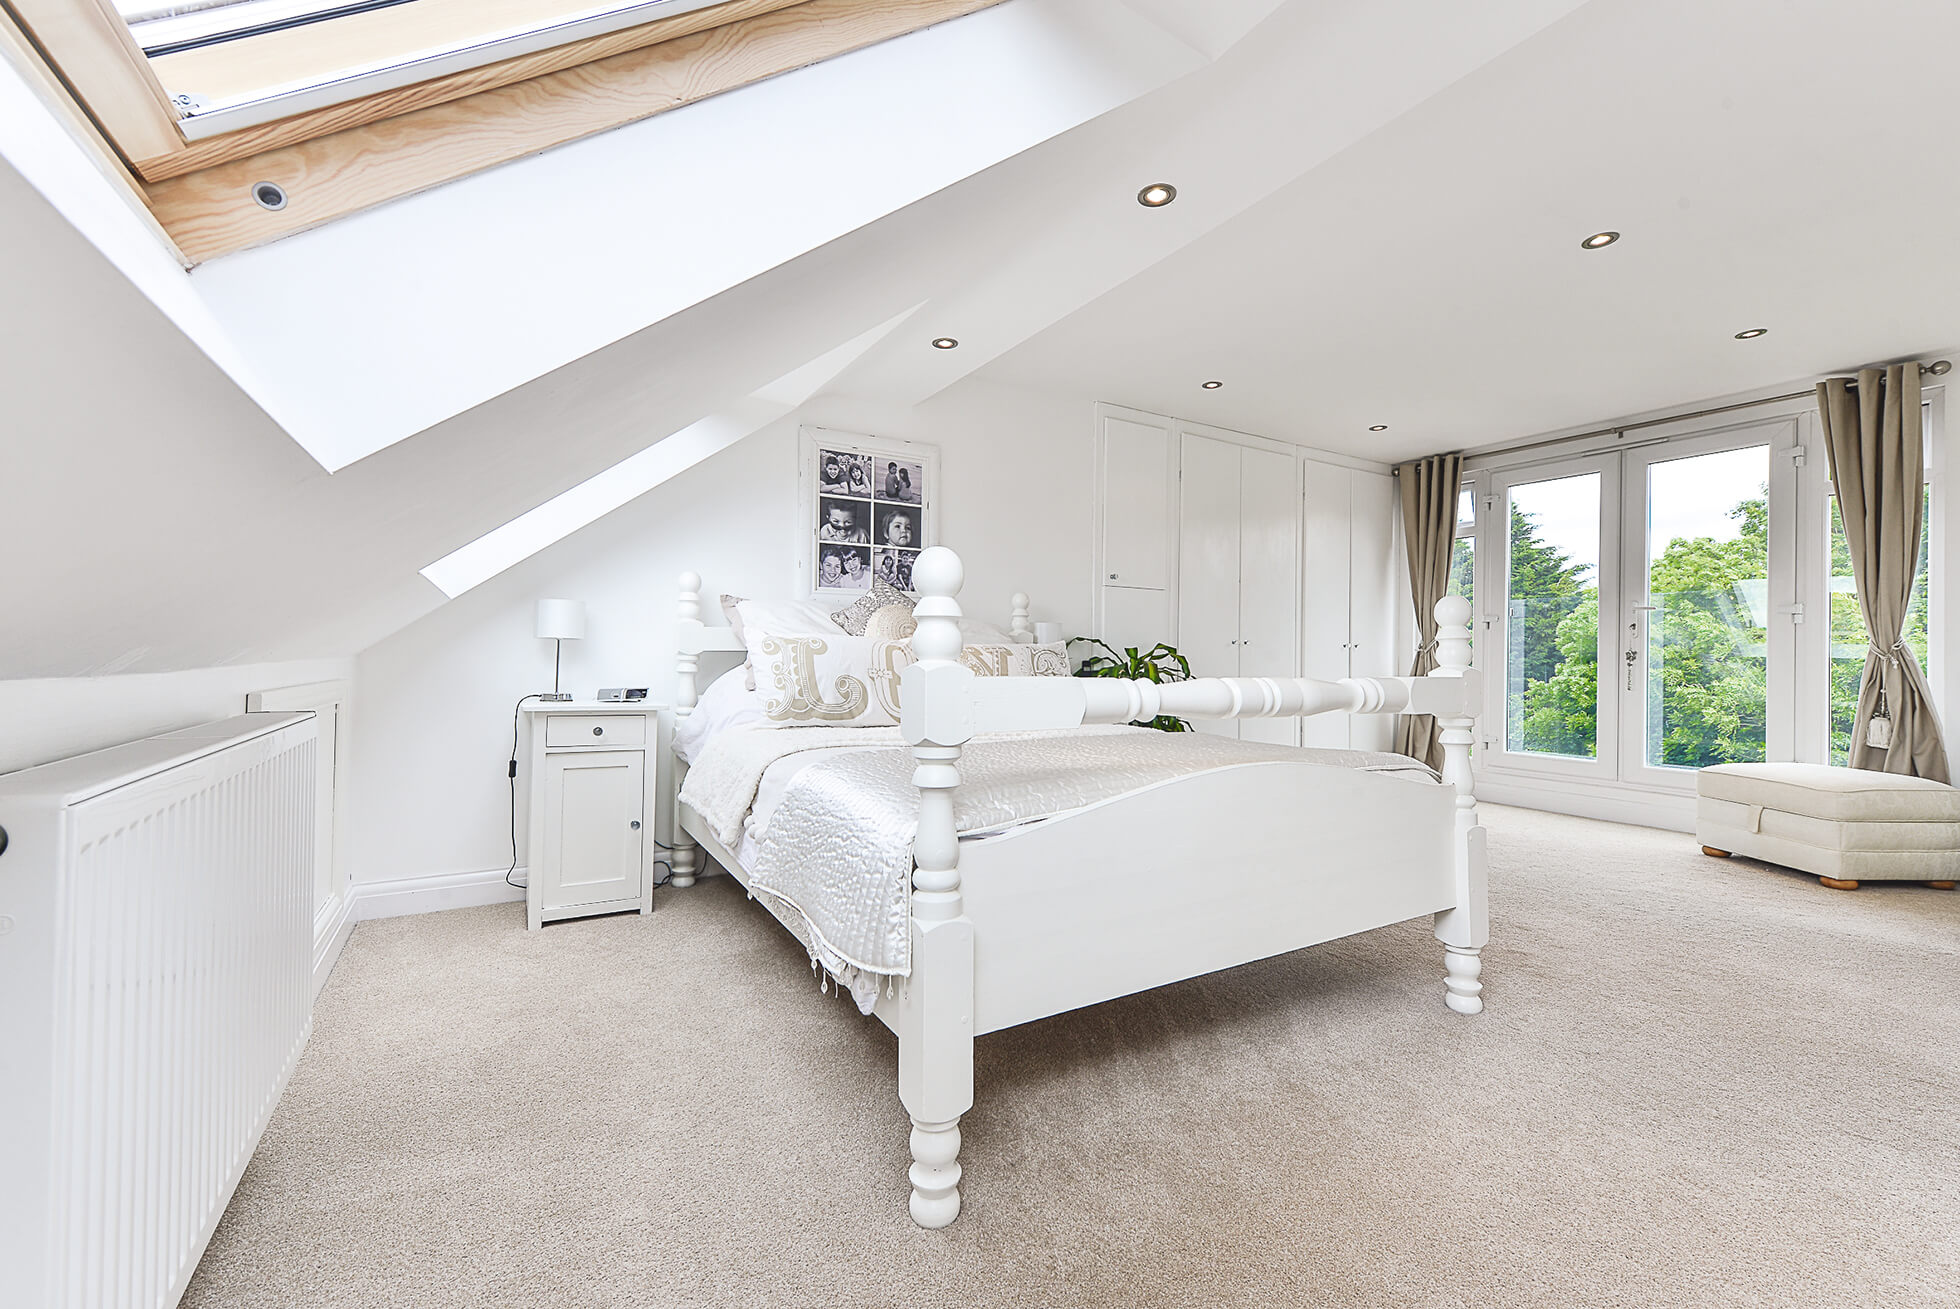 Do you have a question about converting your Loft in Long Marston? Here are the most popular questions asked by our clients.